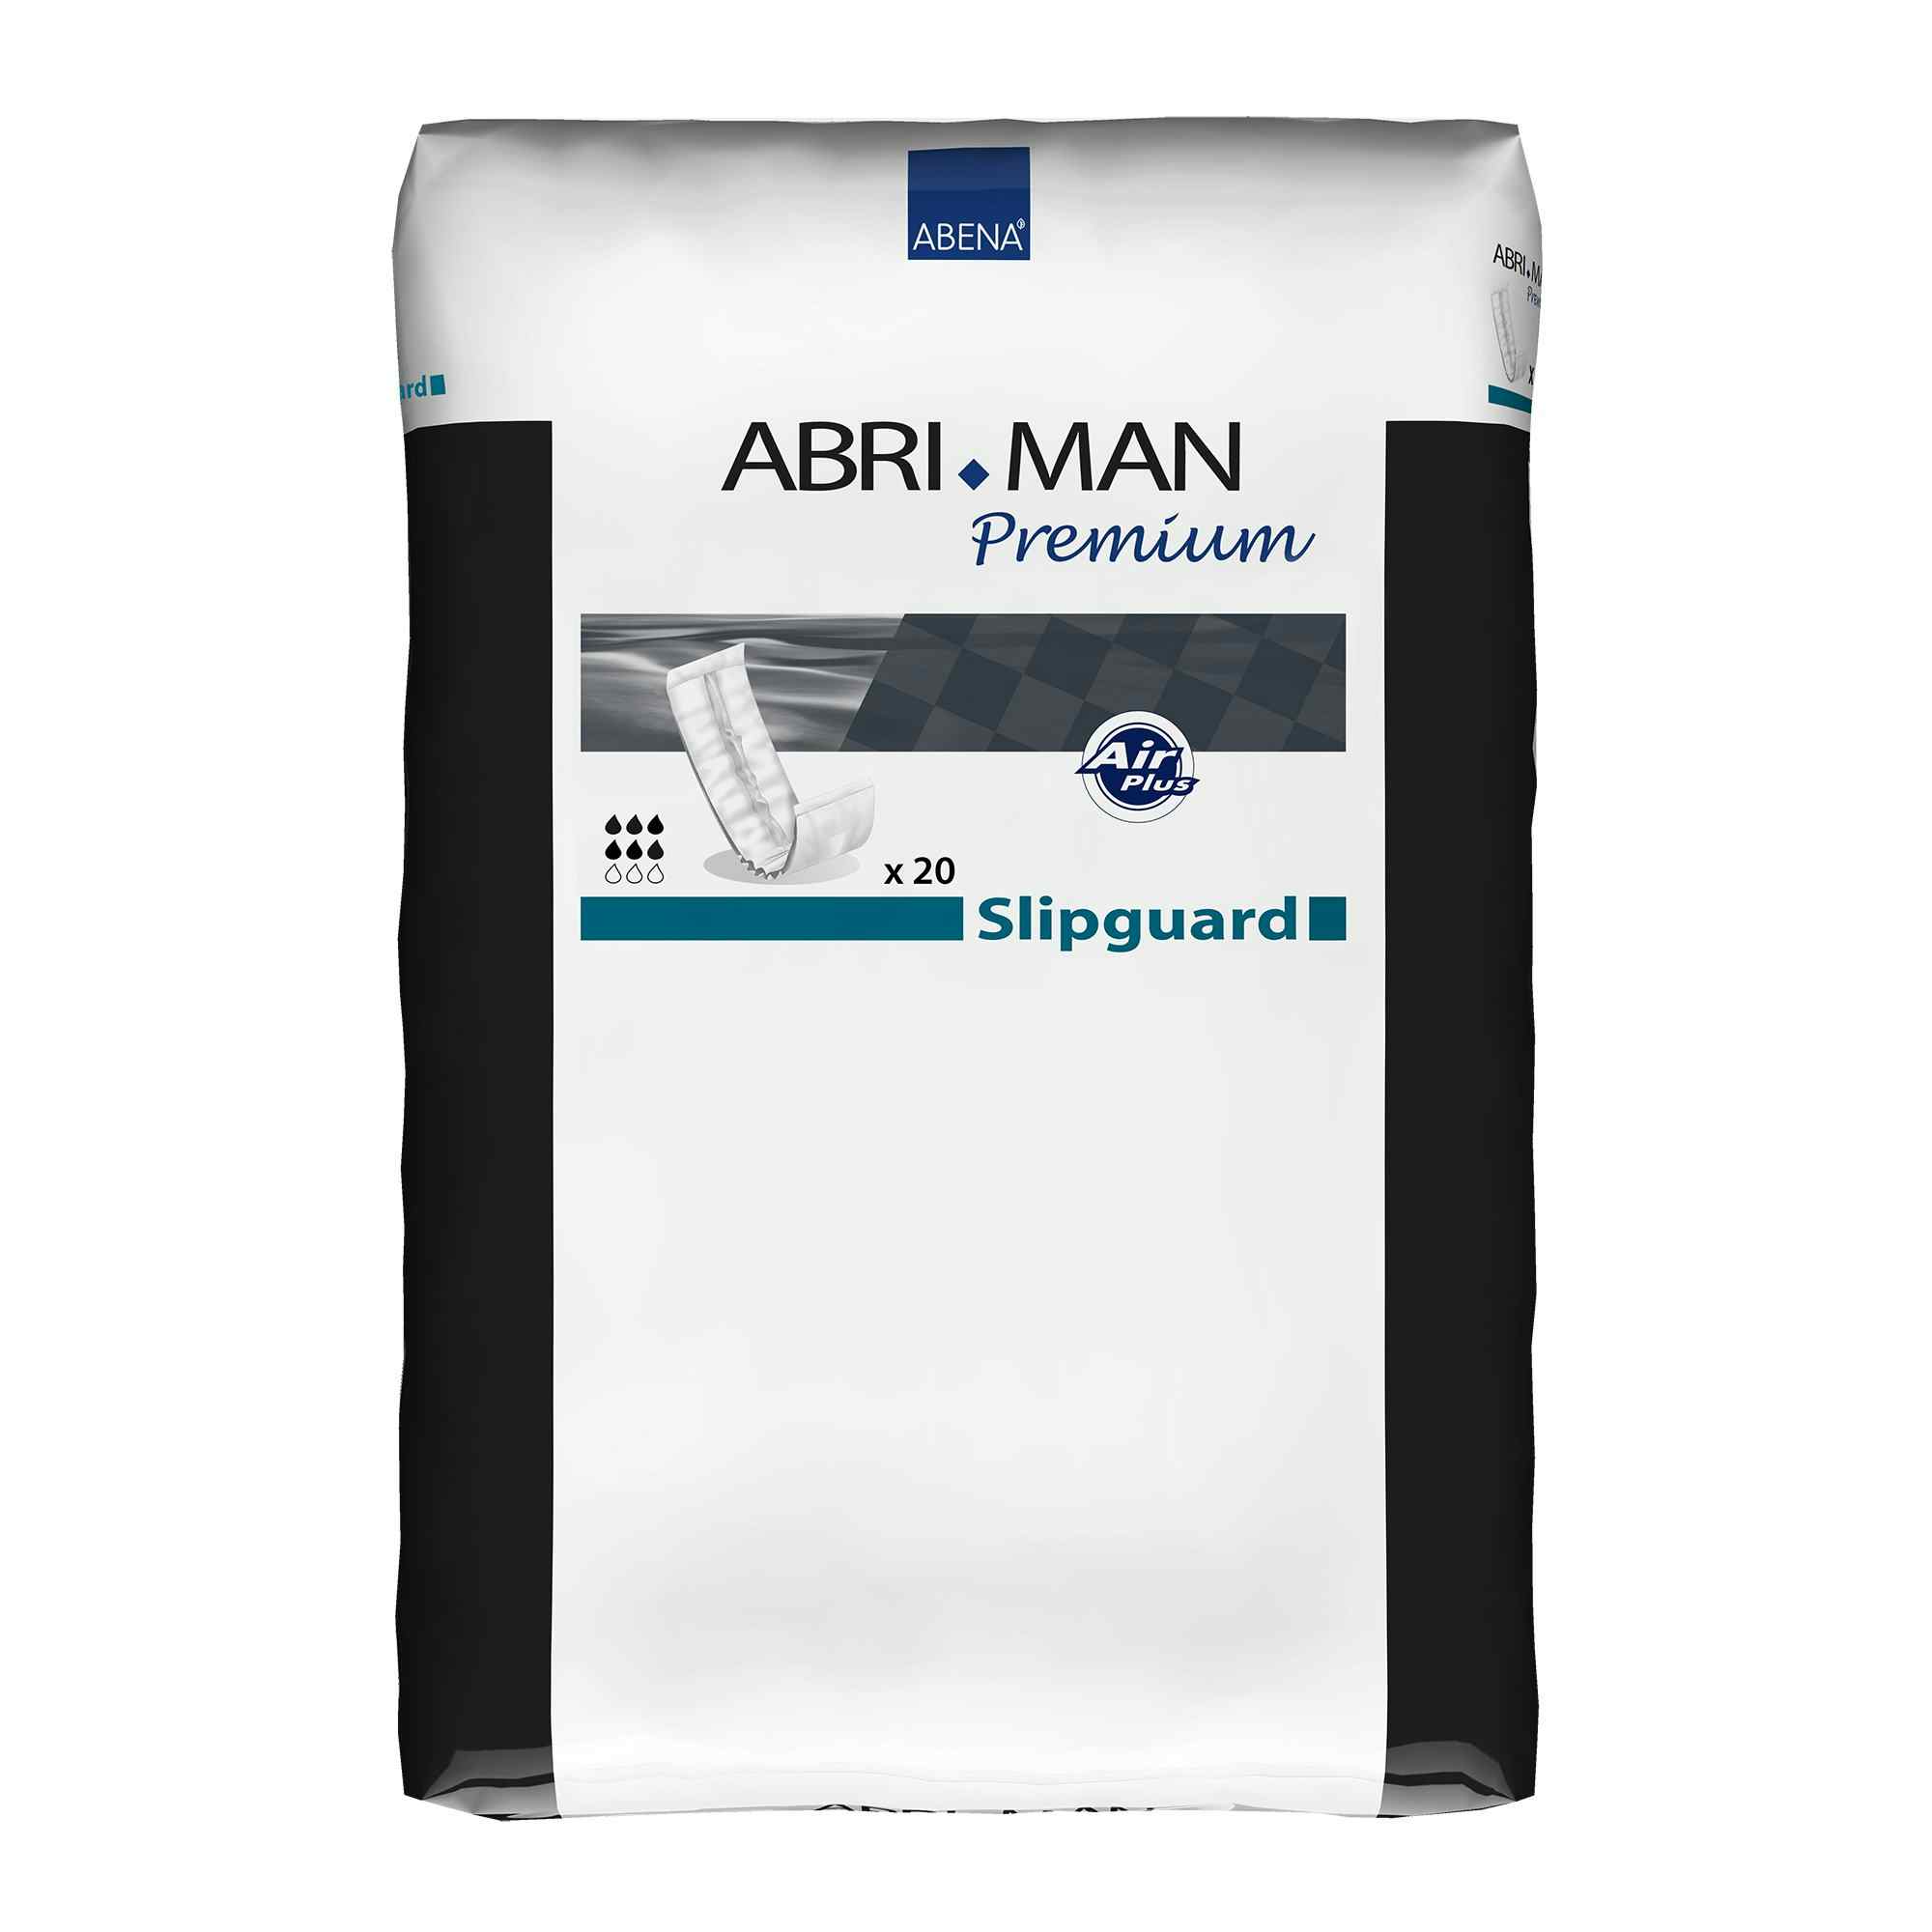 Abri-Man Slipguard Adult Male Disposable Bladder Control Pad, Moderate Absorbency, 207203, One Size Fits Most - Bag of 20